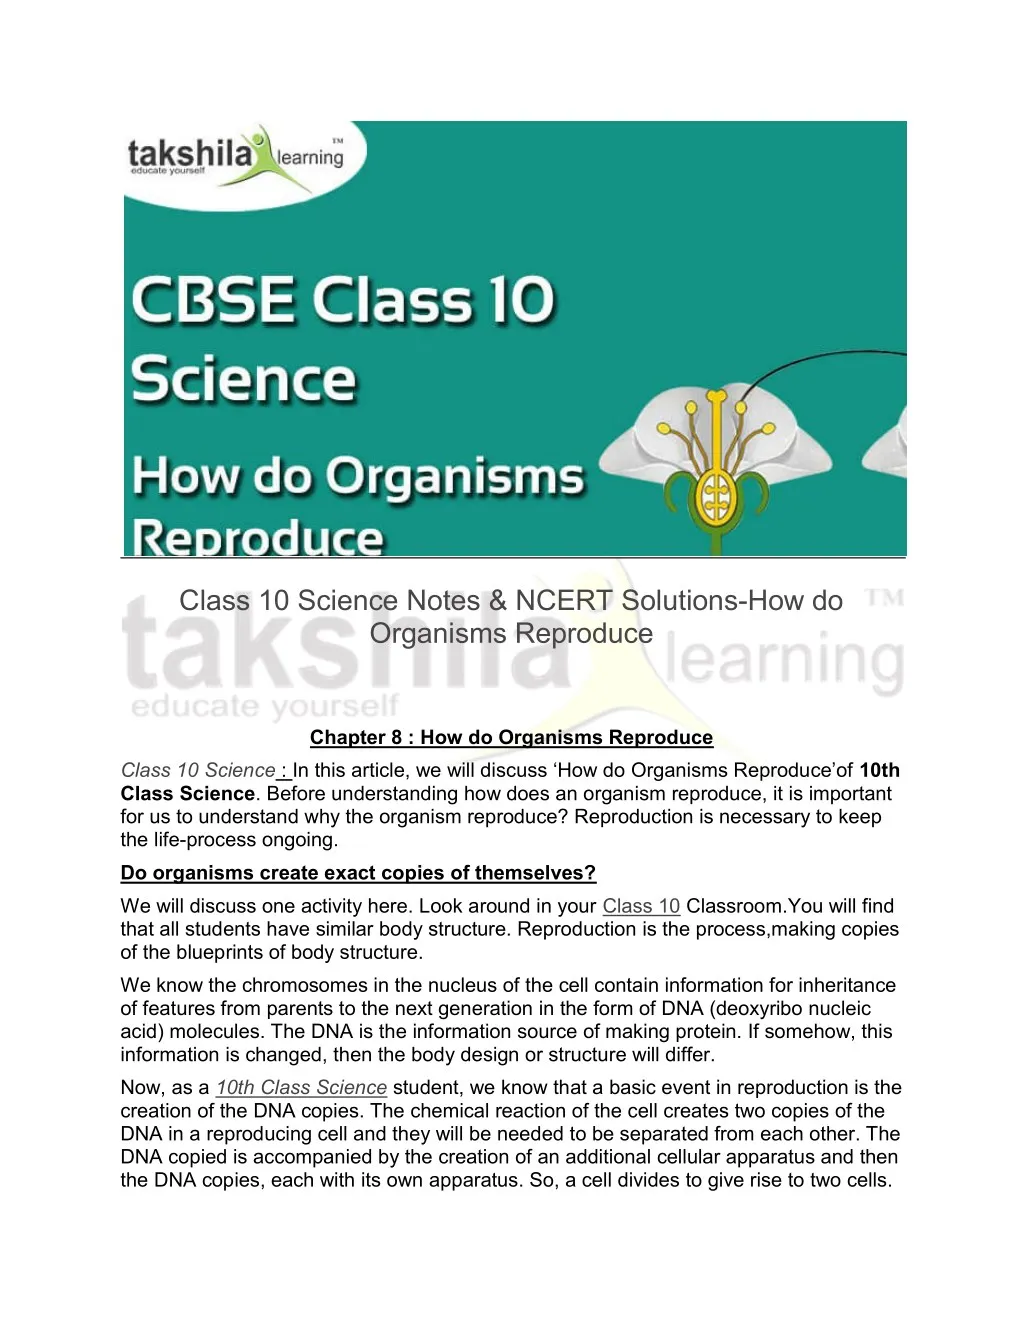 class 10 science notes ncert solutions